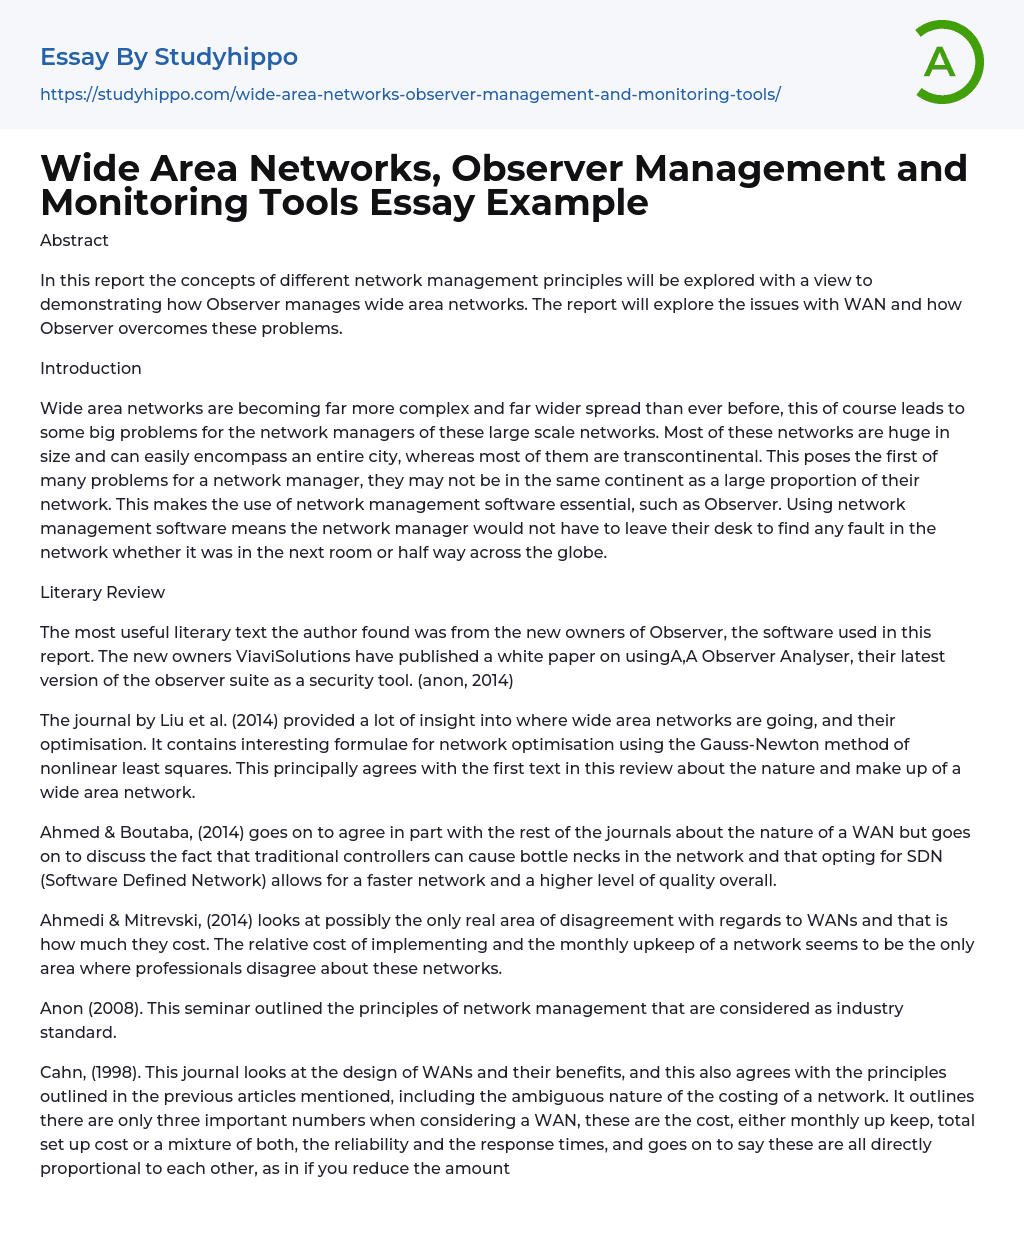 Wide Area Networks, Observer Management and Monitoring Tools Essay Example